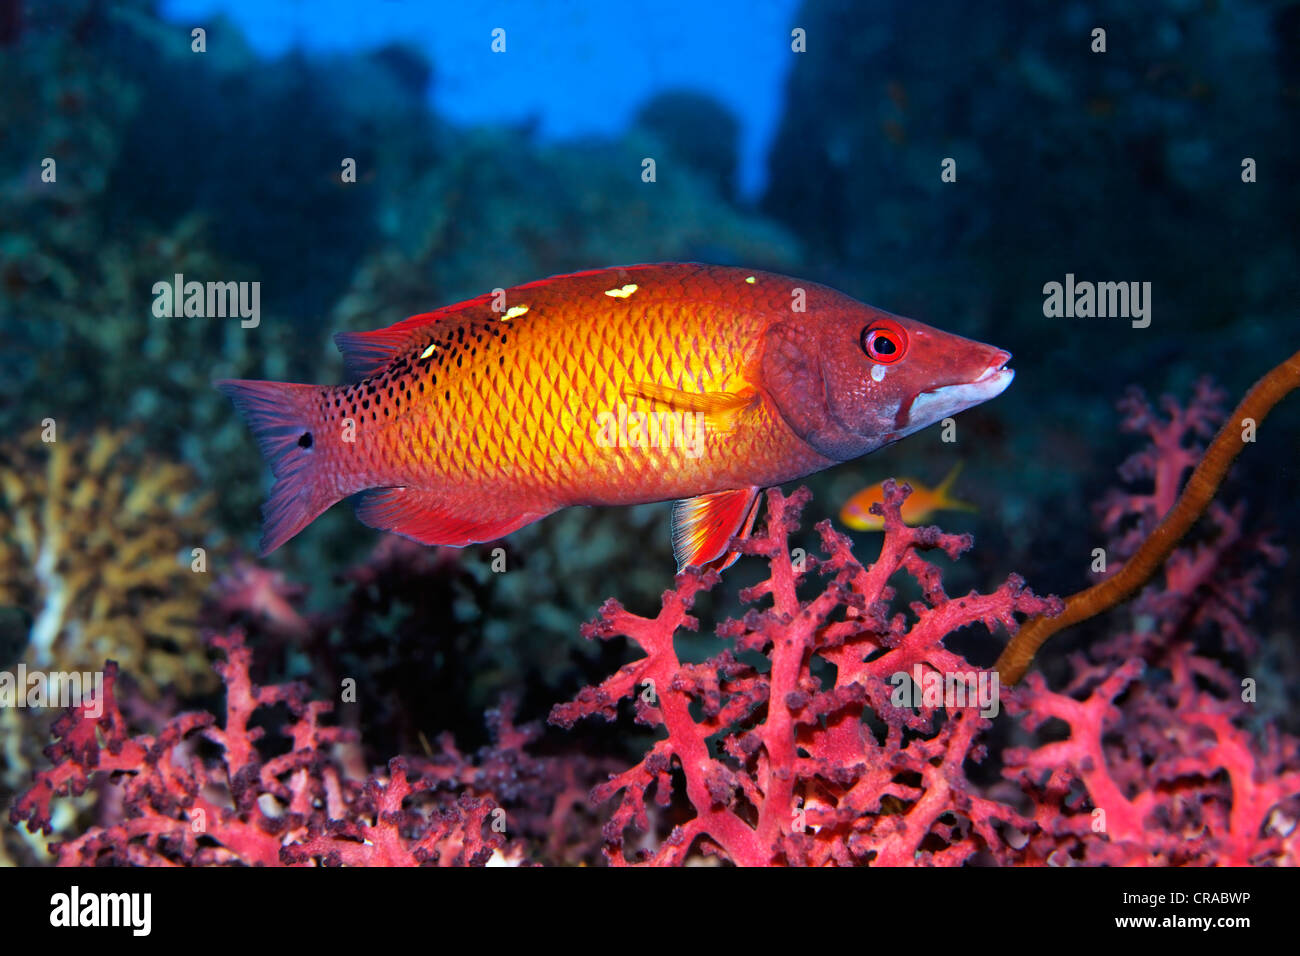 Diana's Hogfish (Bodianus diana) swimming in a coral reef, Habili Marsa Alam, Egypt, Red Sea, Africa Stock Photo